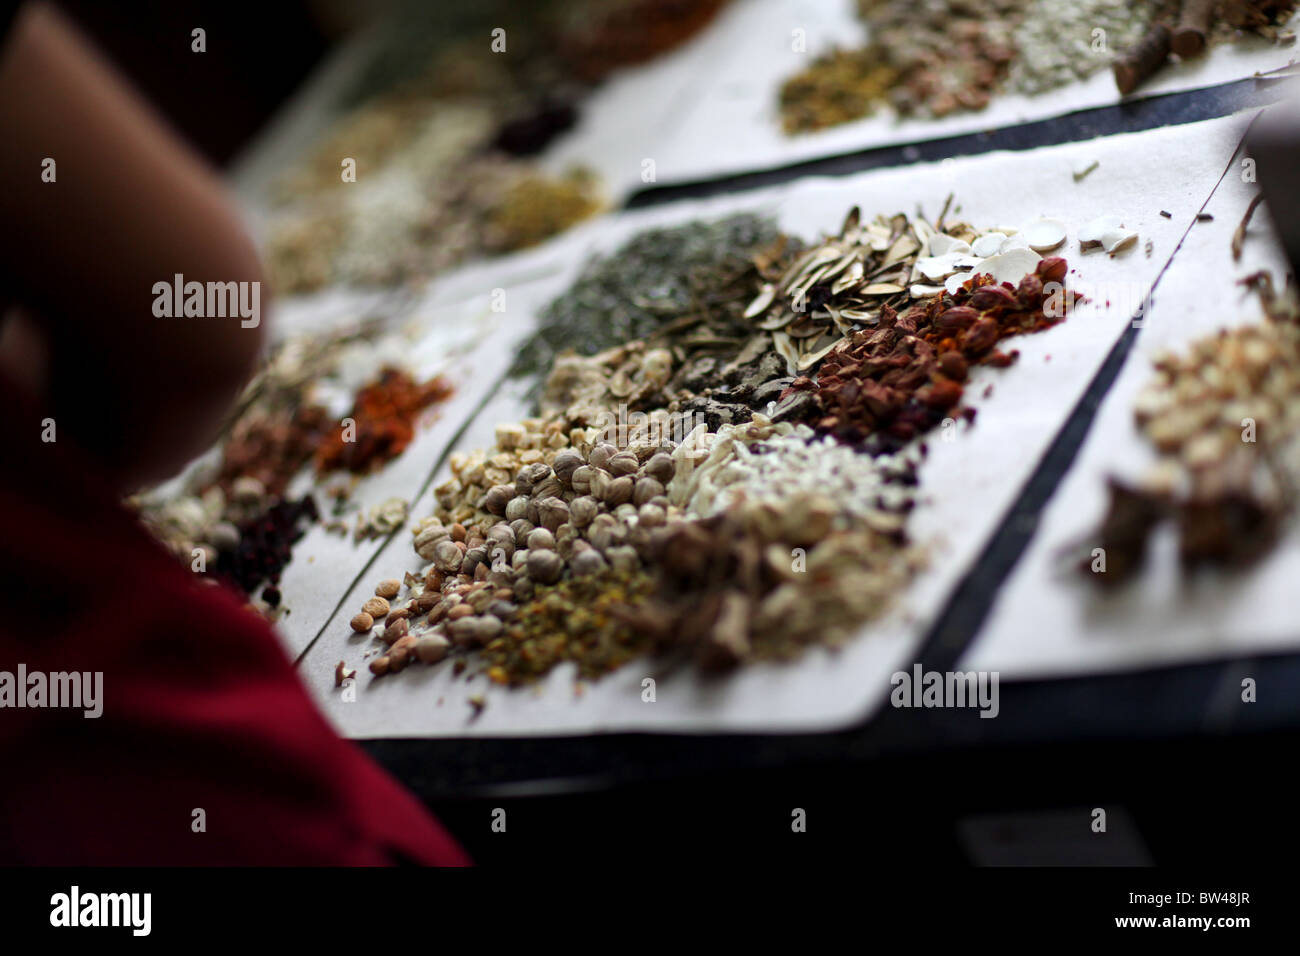 Personal presciptions being prepared at the Fulintang Traditional Chinese Herbal Medicine Store in Kunming, China. Stock Photo